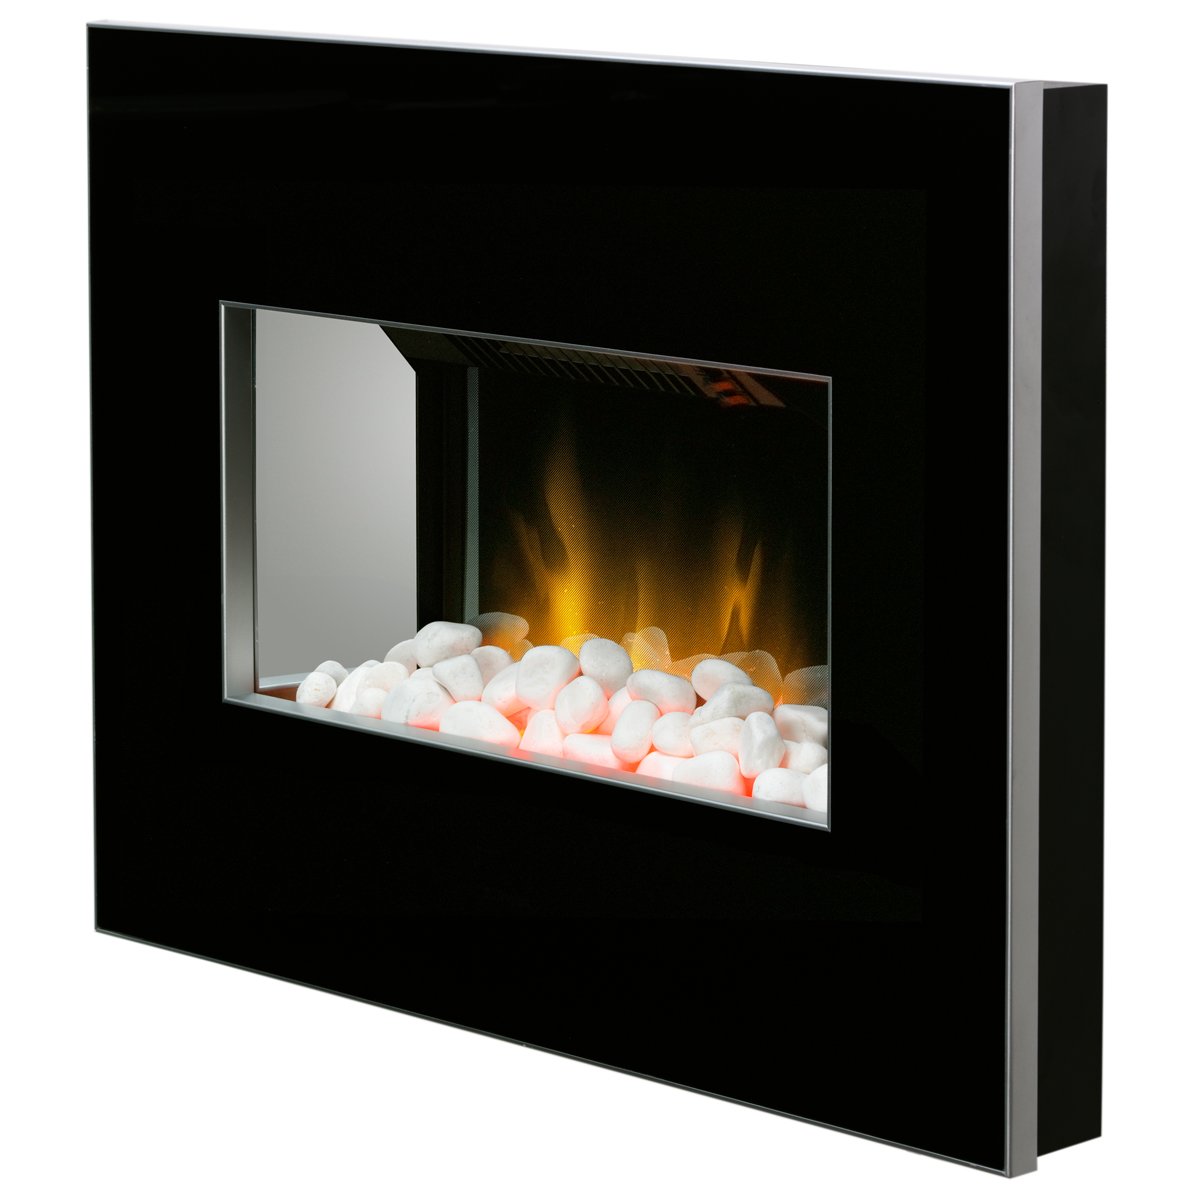 Dimplex Clovab Wall Mounted Electric, Electric Wall Mounted Fireplace Australia